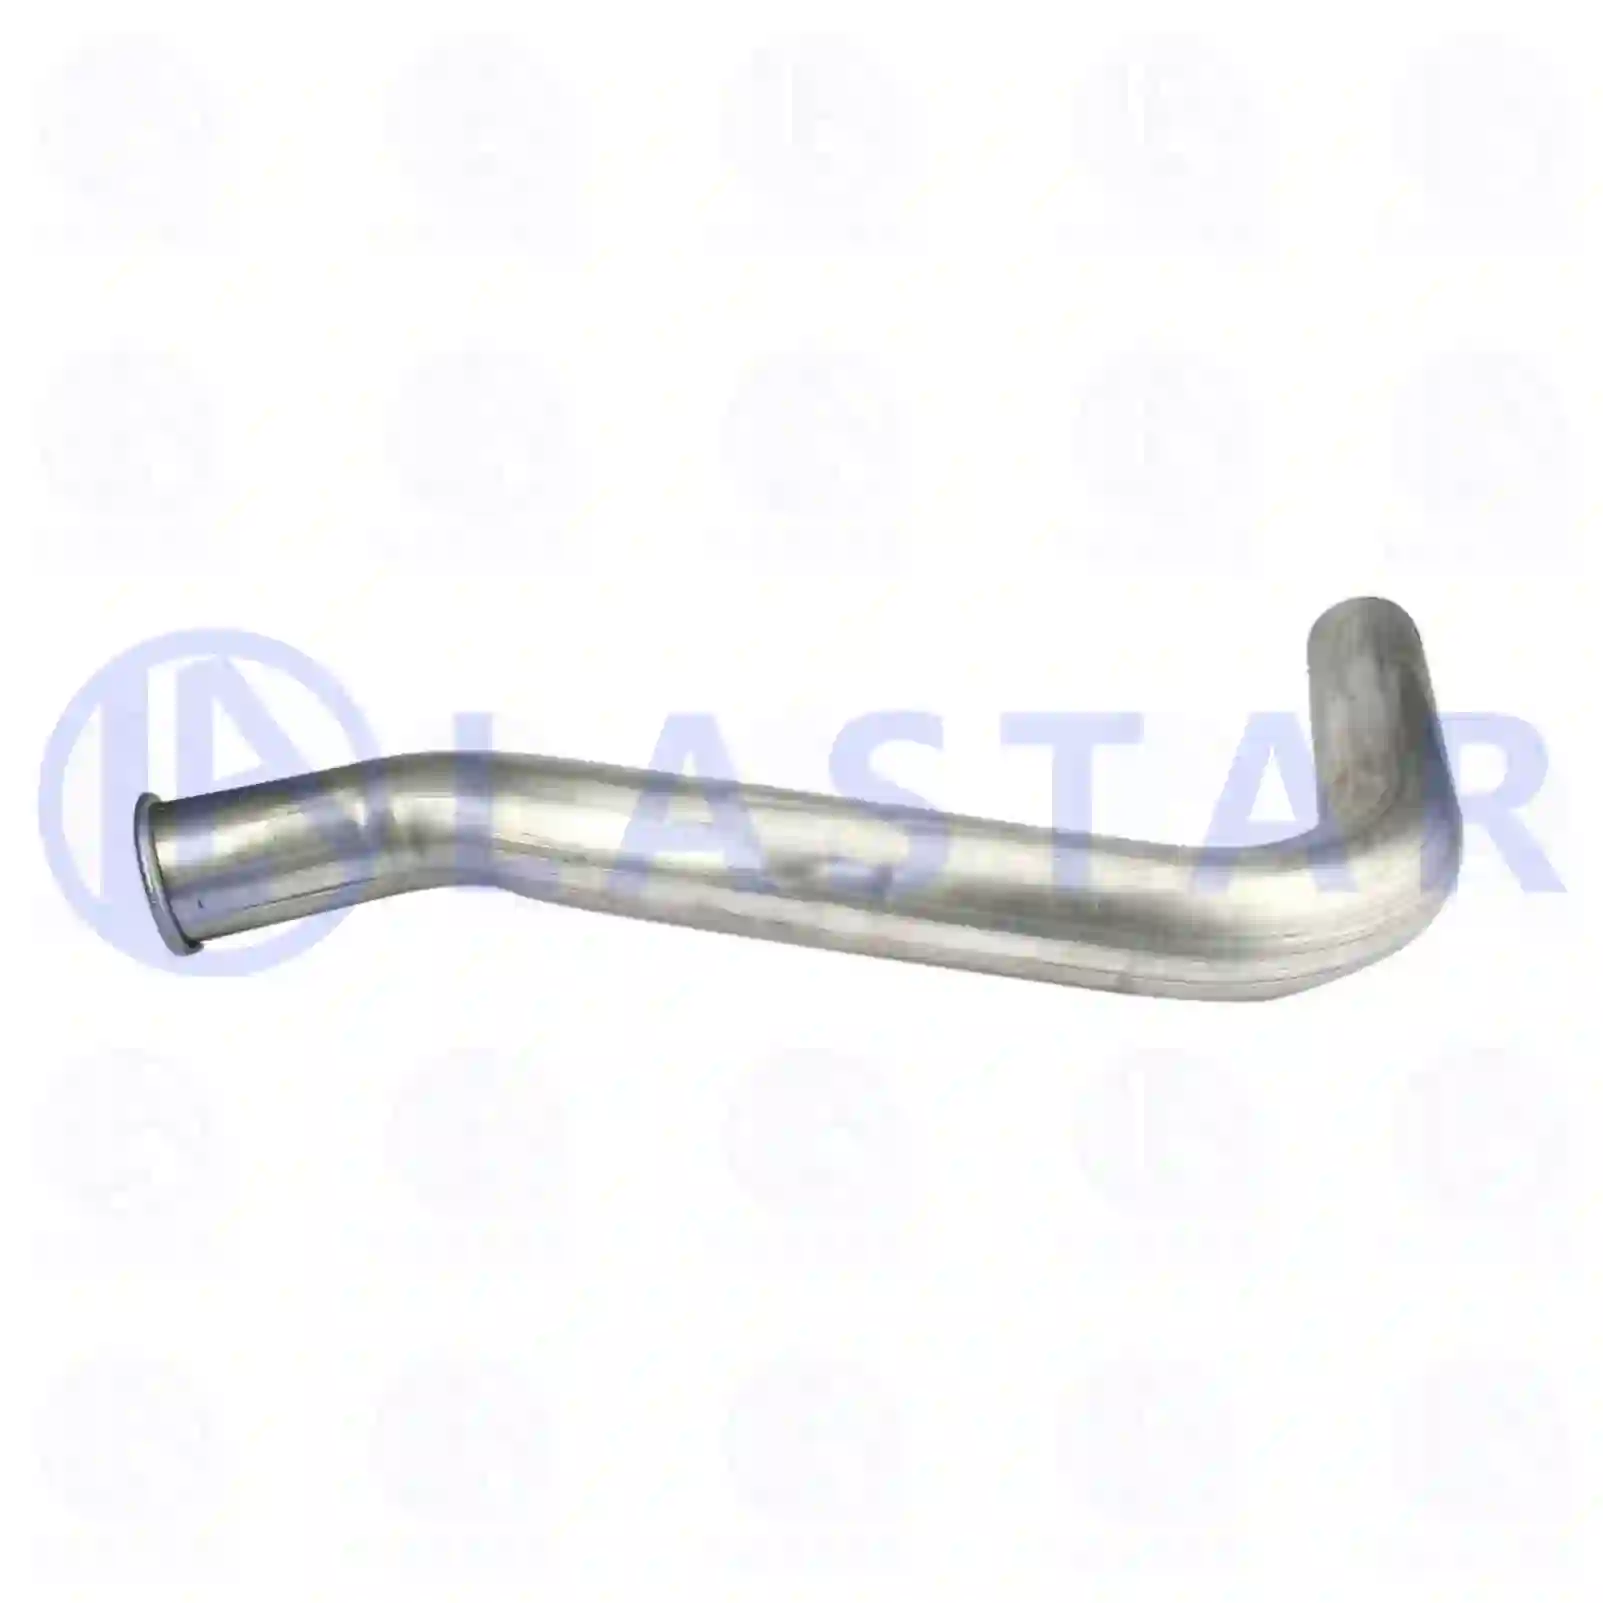 End pipe, 77707008, 1114161 ||  77707008 Lastar Spare Part | Truck Spare Parts, Auotomotive Spare Parts End pipe, 77707008, 1114161 ||  77707008 Lastar Spare Part | Truck Spare Parts, Auotomotive Spare Parts